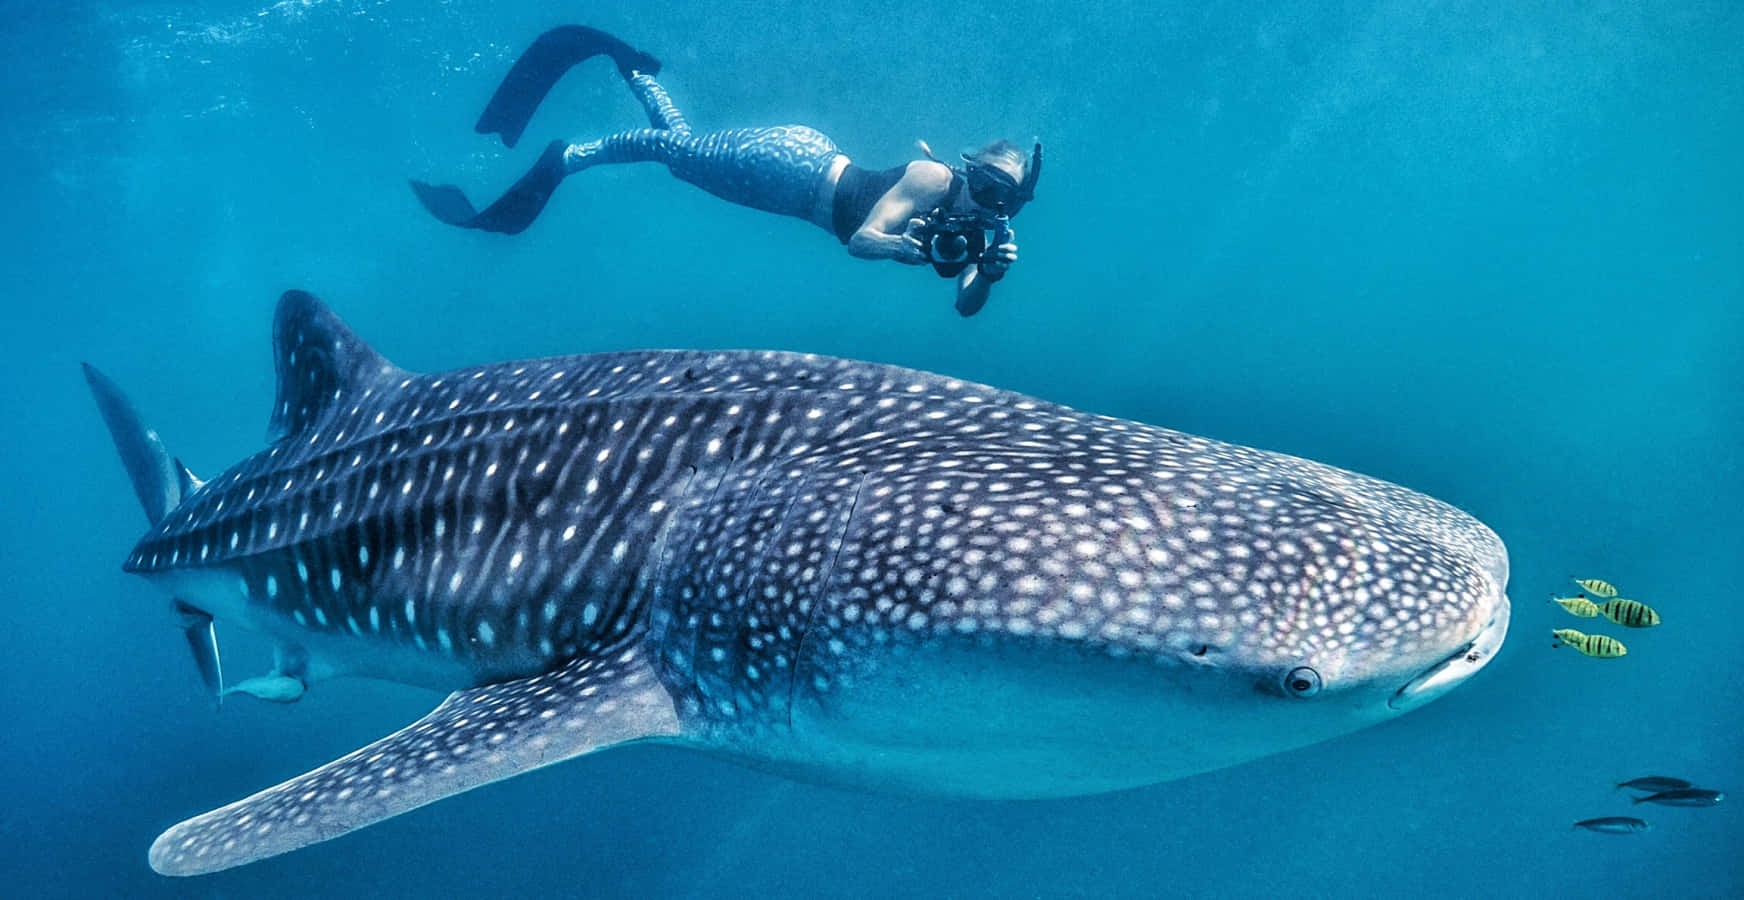 "Dive into the Ocean and Experience an Encounter with a Whale Shark"